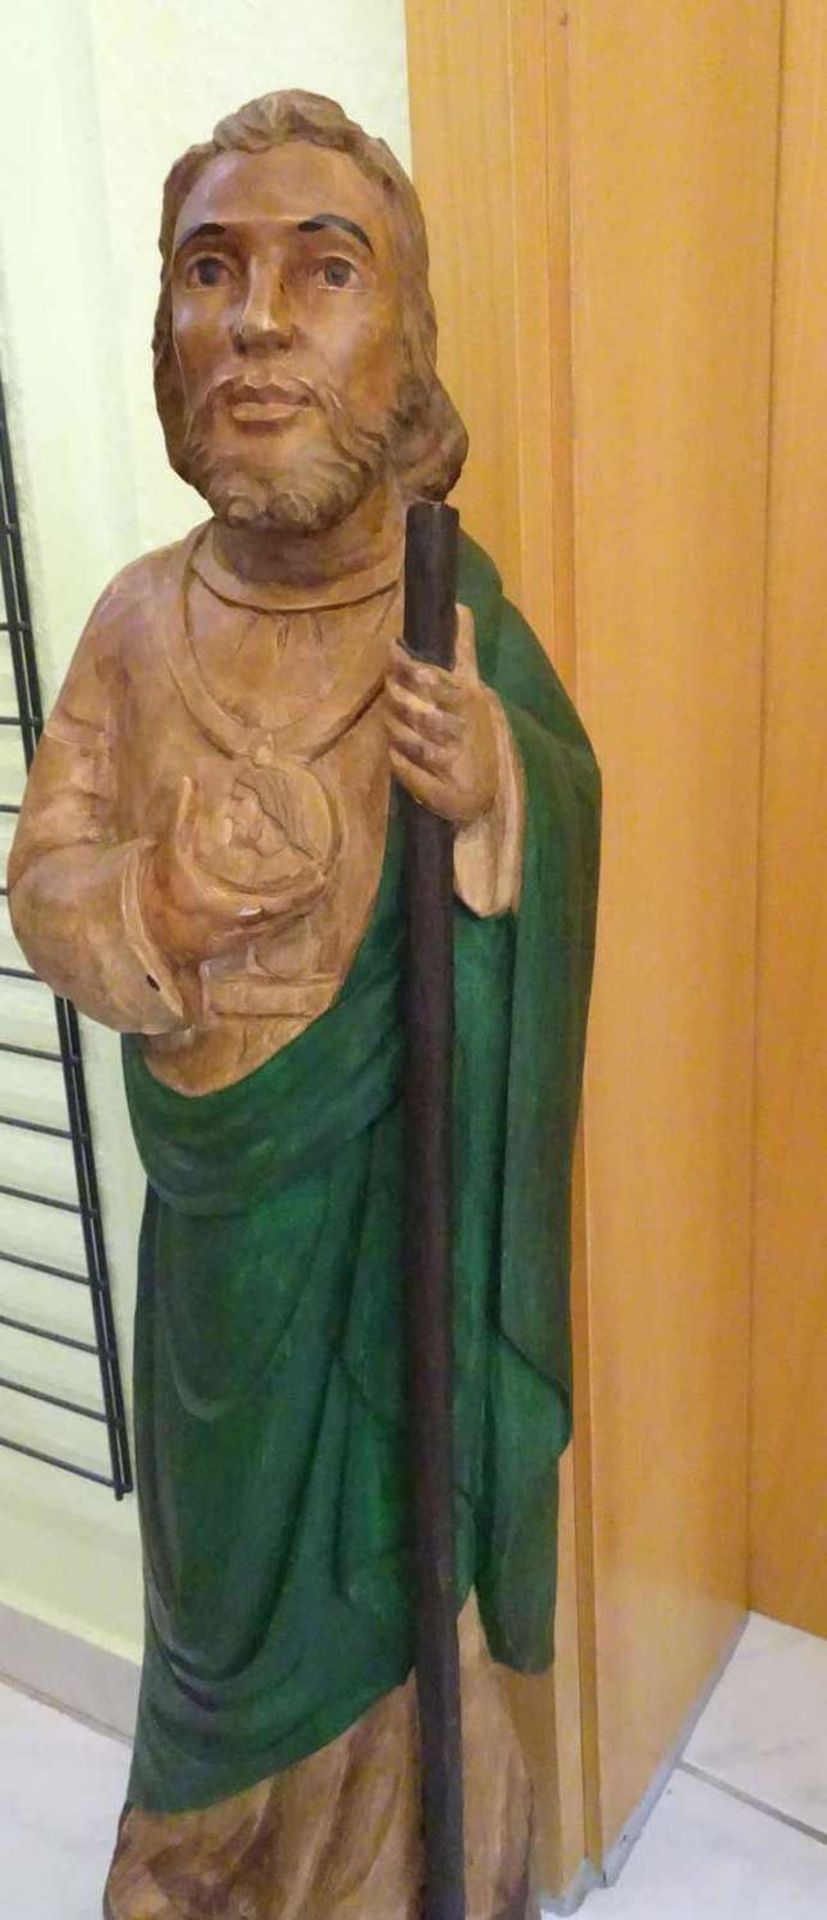 large wooden figure "shepherd with staff", color-coded. Height approx. 95 cm. Statue in good - Bild 3 aus 3